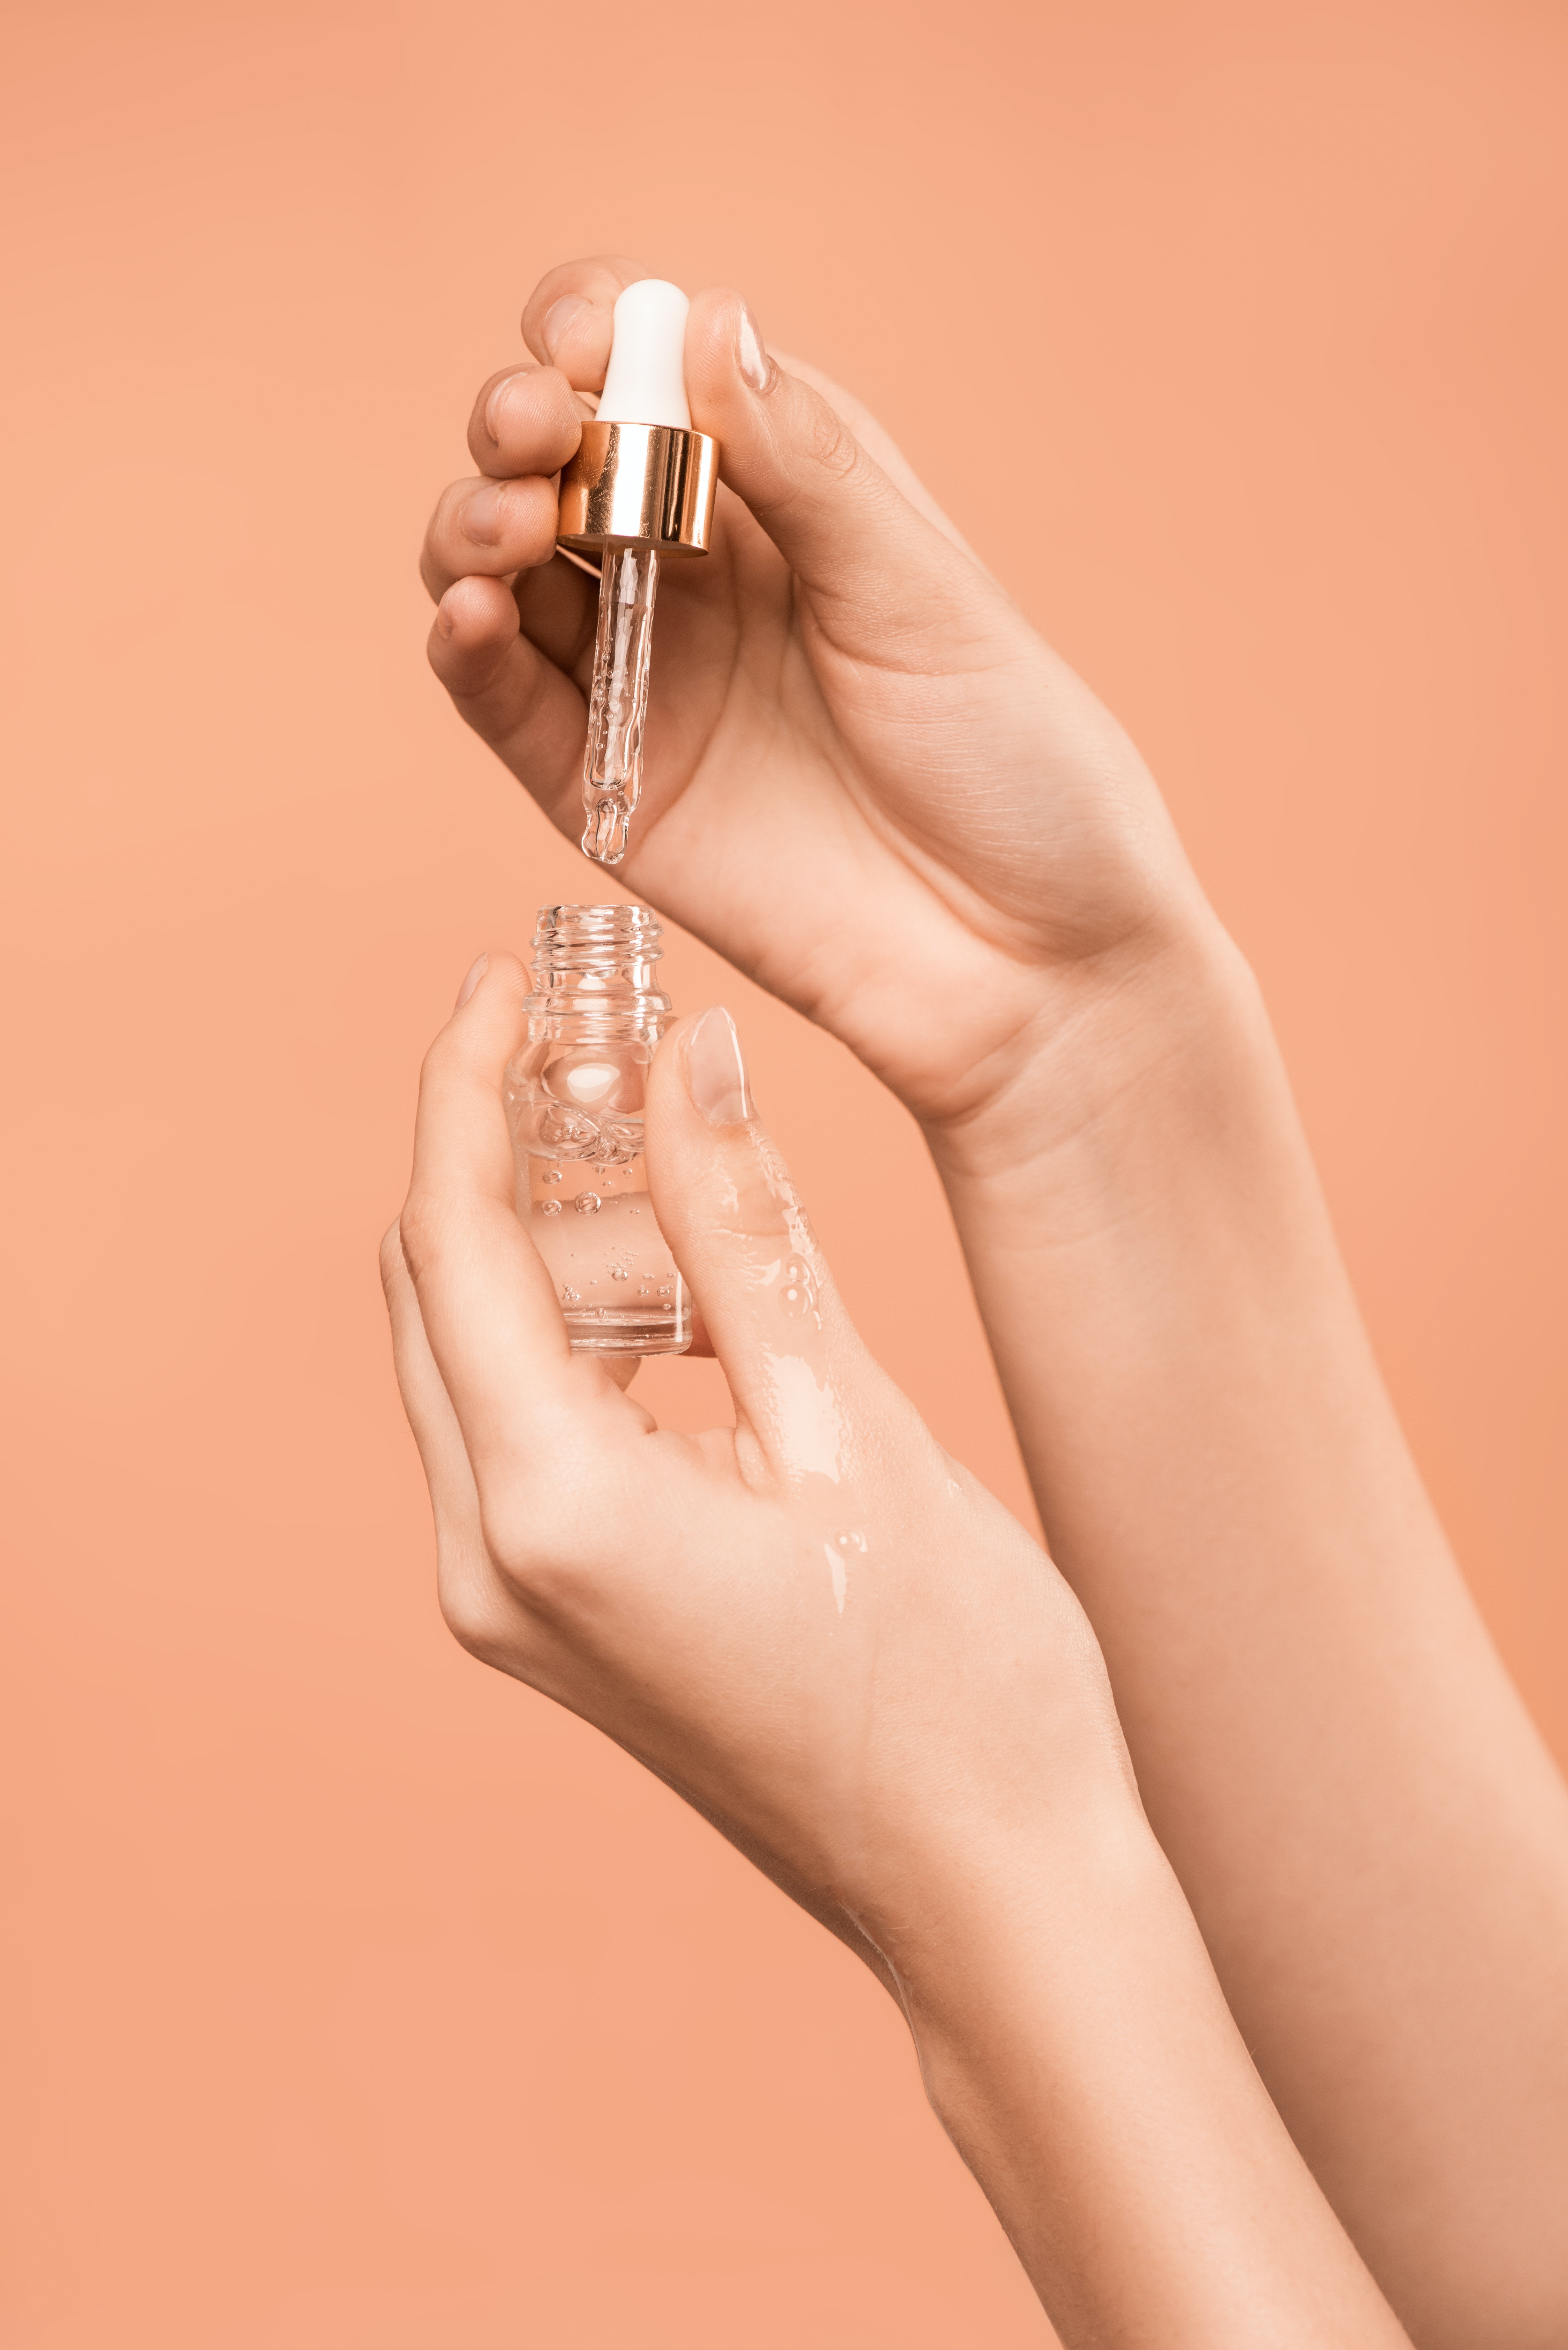 Top 5 Best-Selling COSRX Ampoules to Add to Your Skincare Routine